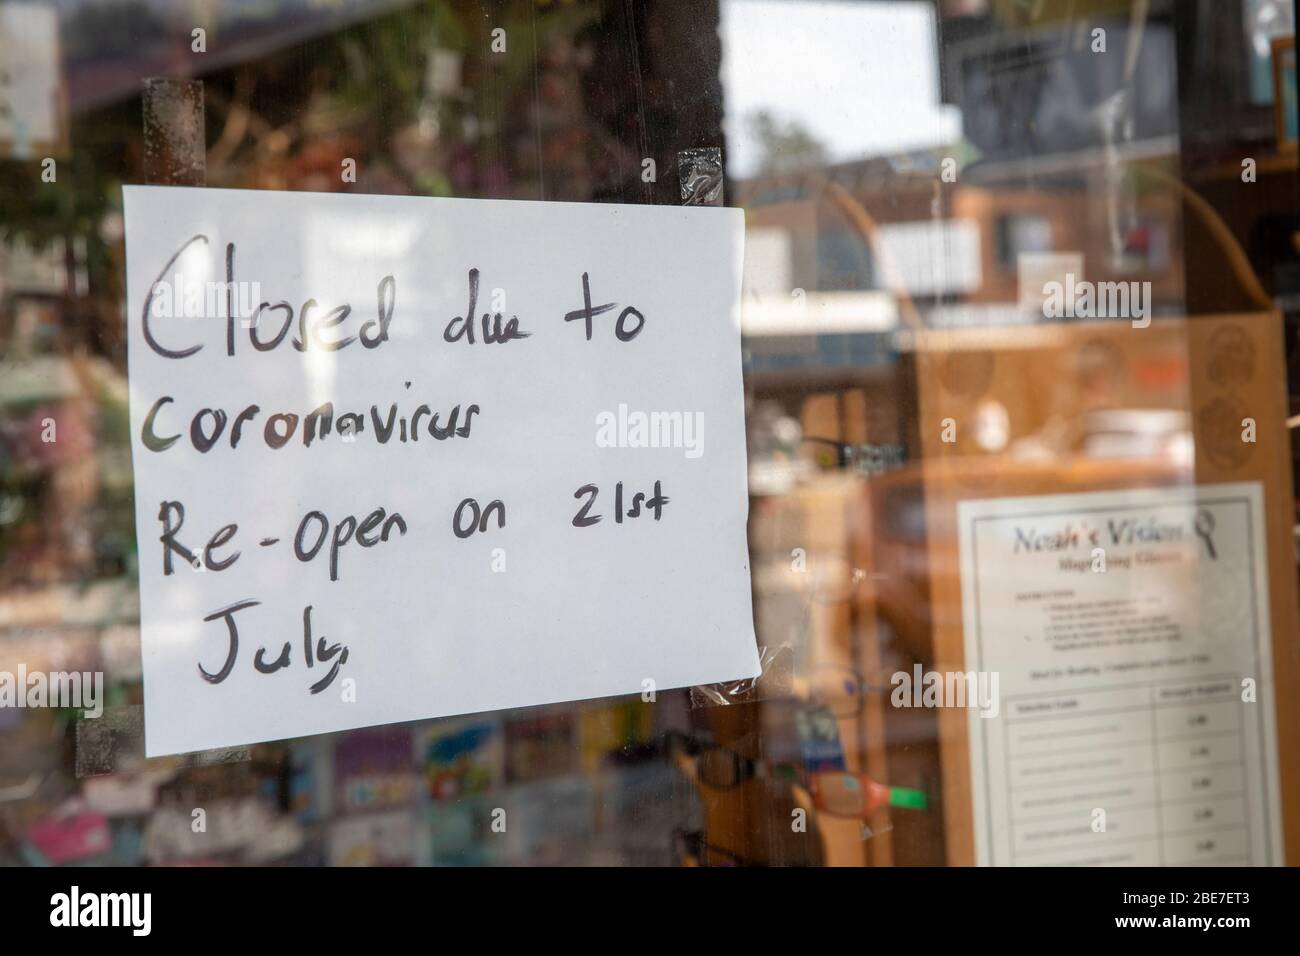 Shop erects home made sign advising shop will be closed to 21 july due to coronavirus, pessimistic view,Sydney,Australia Stock Photo